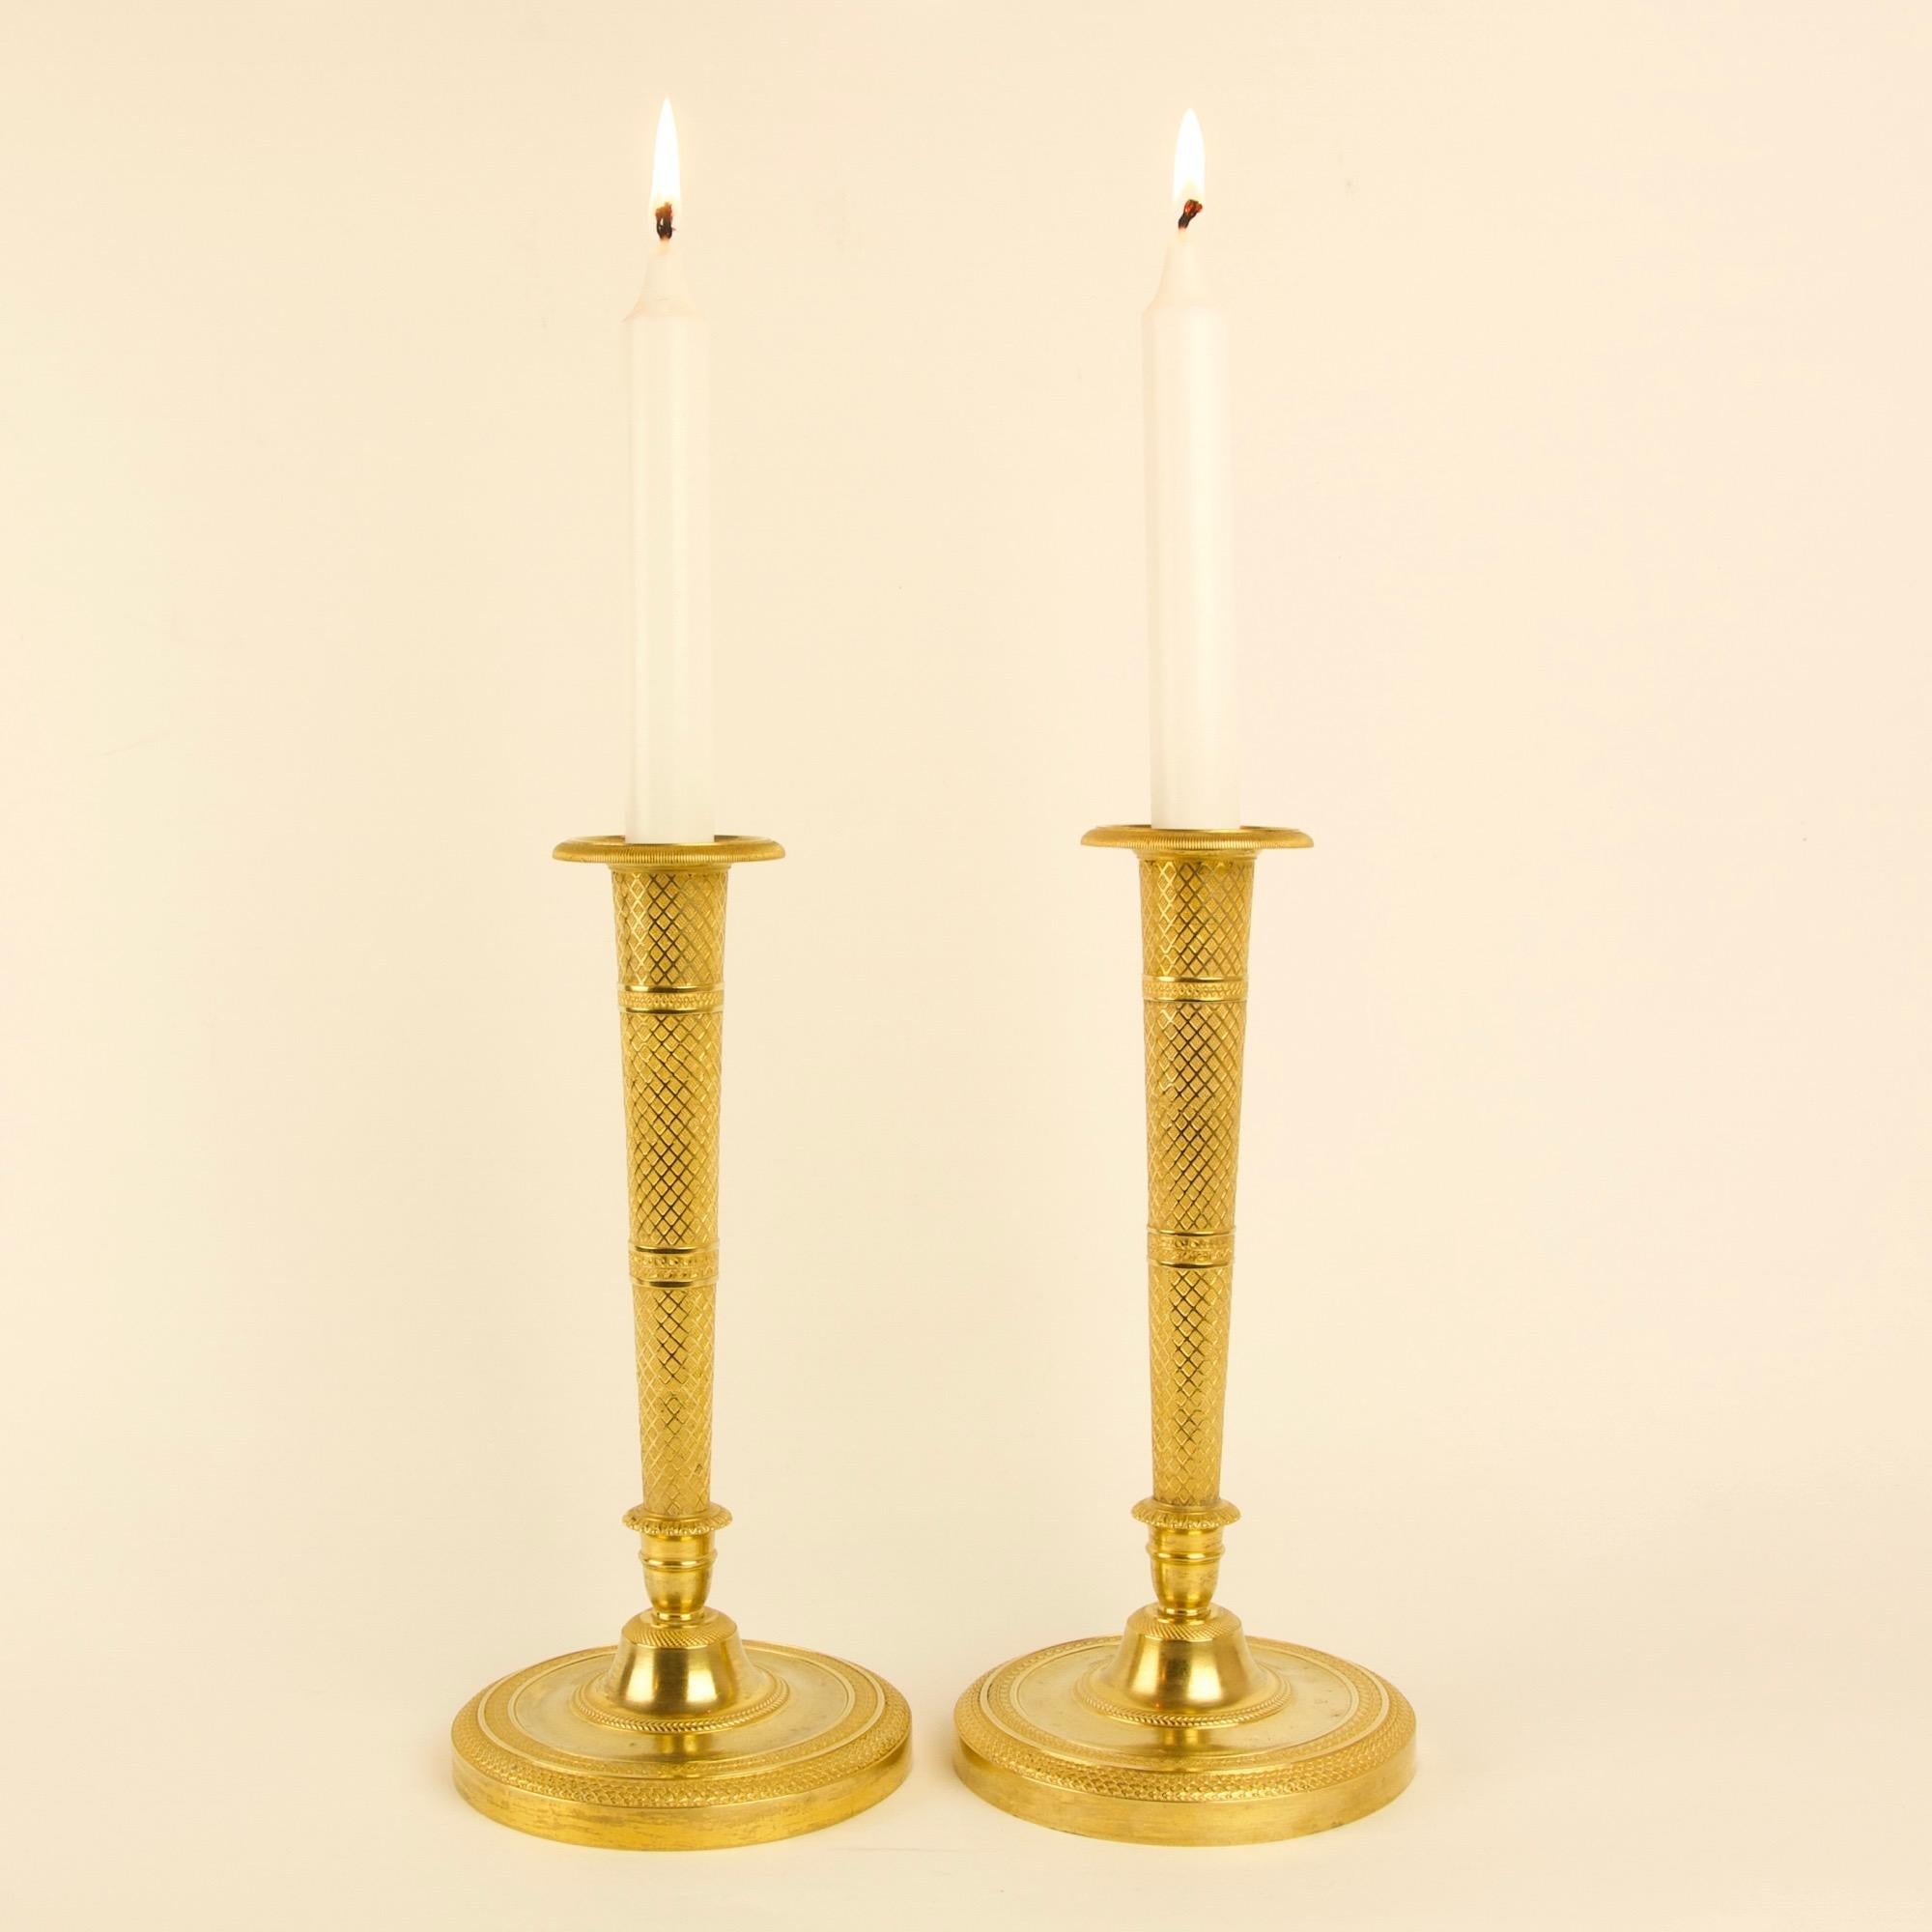 Pair of excellent early 19th century French empire gilt bronze candlesticks in the style of Claude Galle (1758-1815):

A tapering stem with rich trelliswork relief divided into three sections by two rings with foliage and lozenge decoration raised